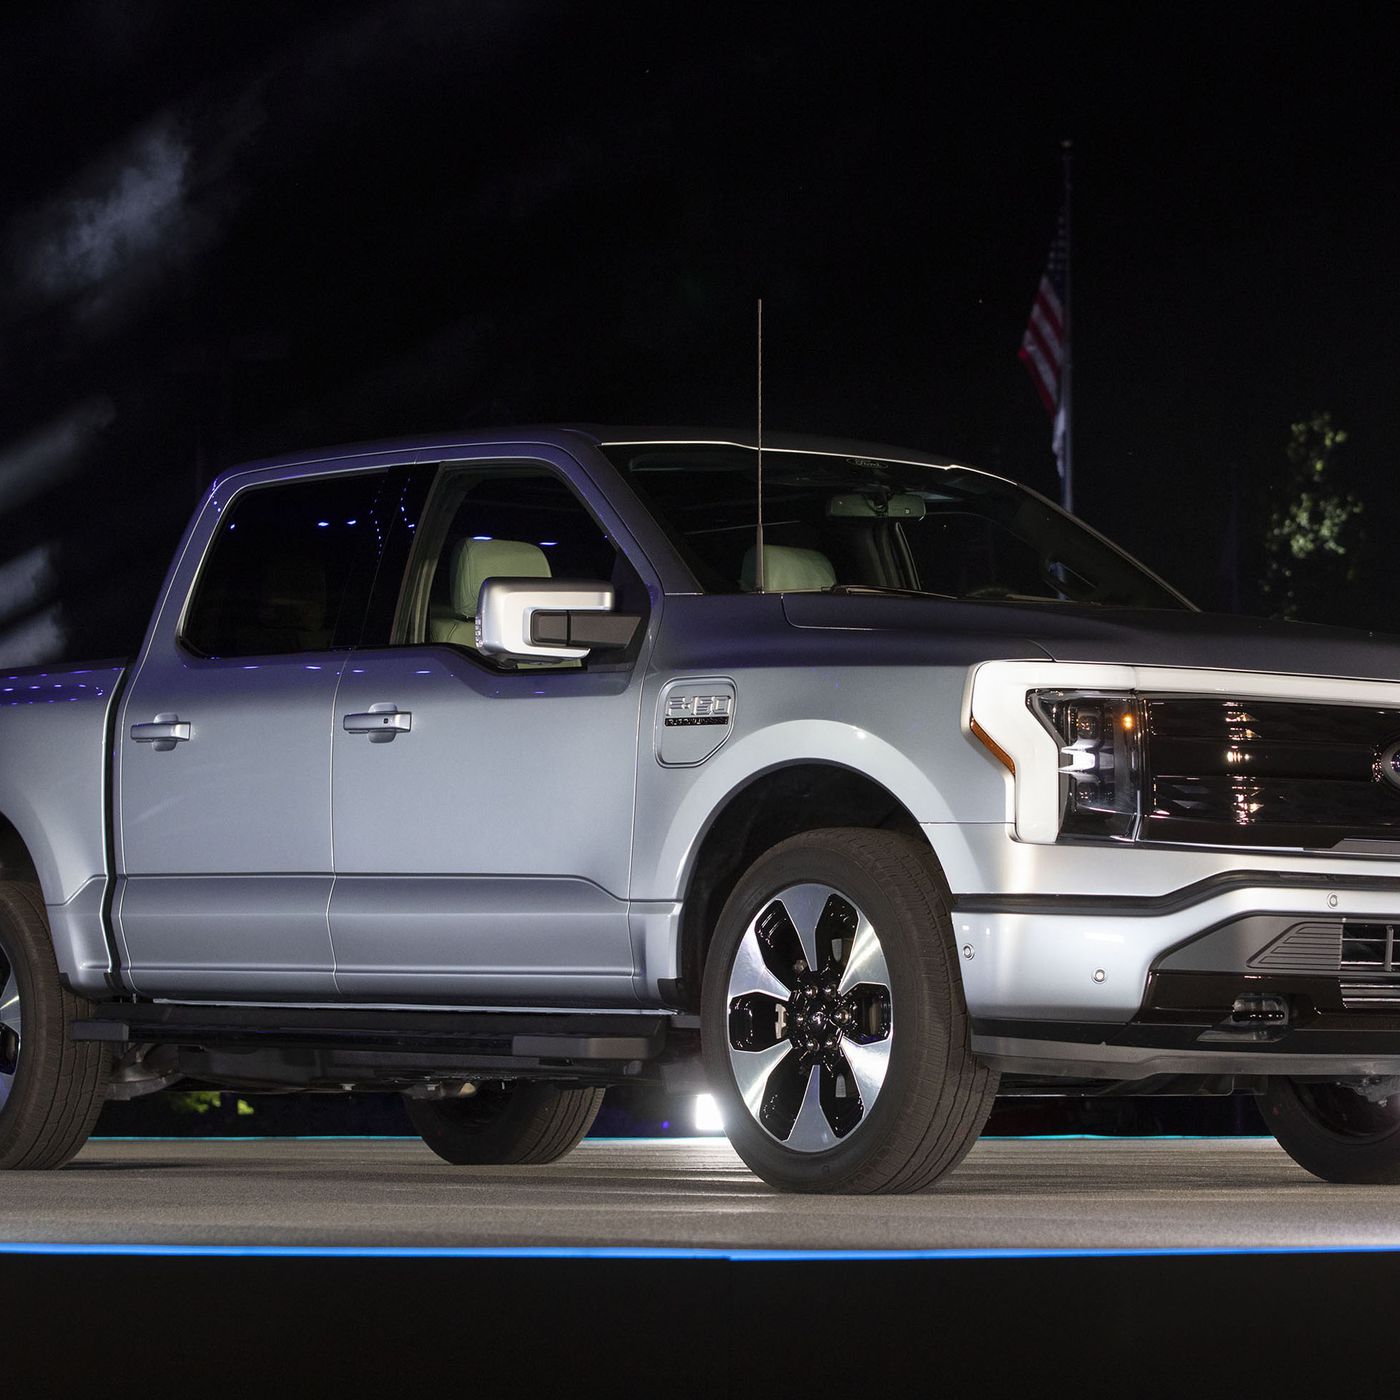 The Most Potent and Pricey F-150 Pickup Vehicle from Ford was Introduced